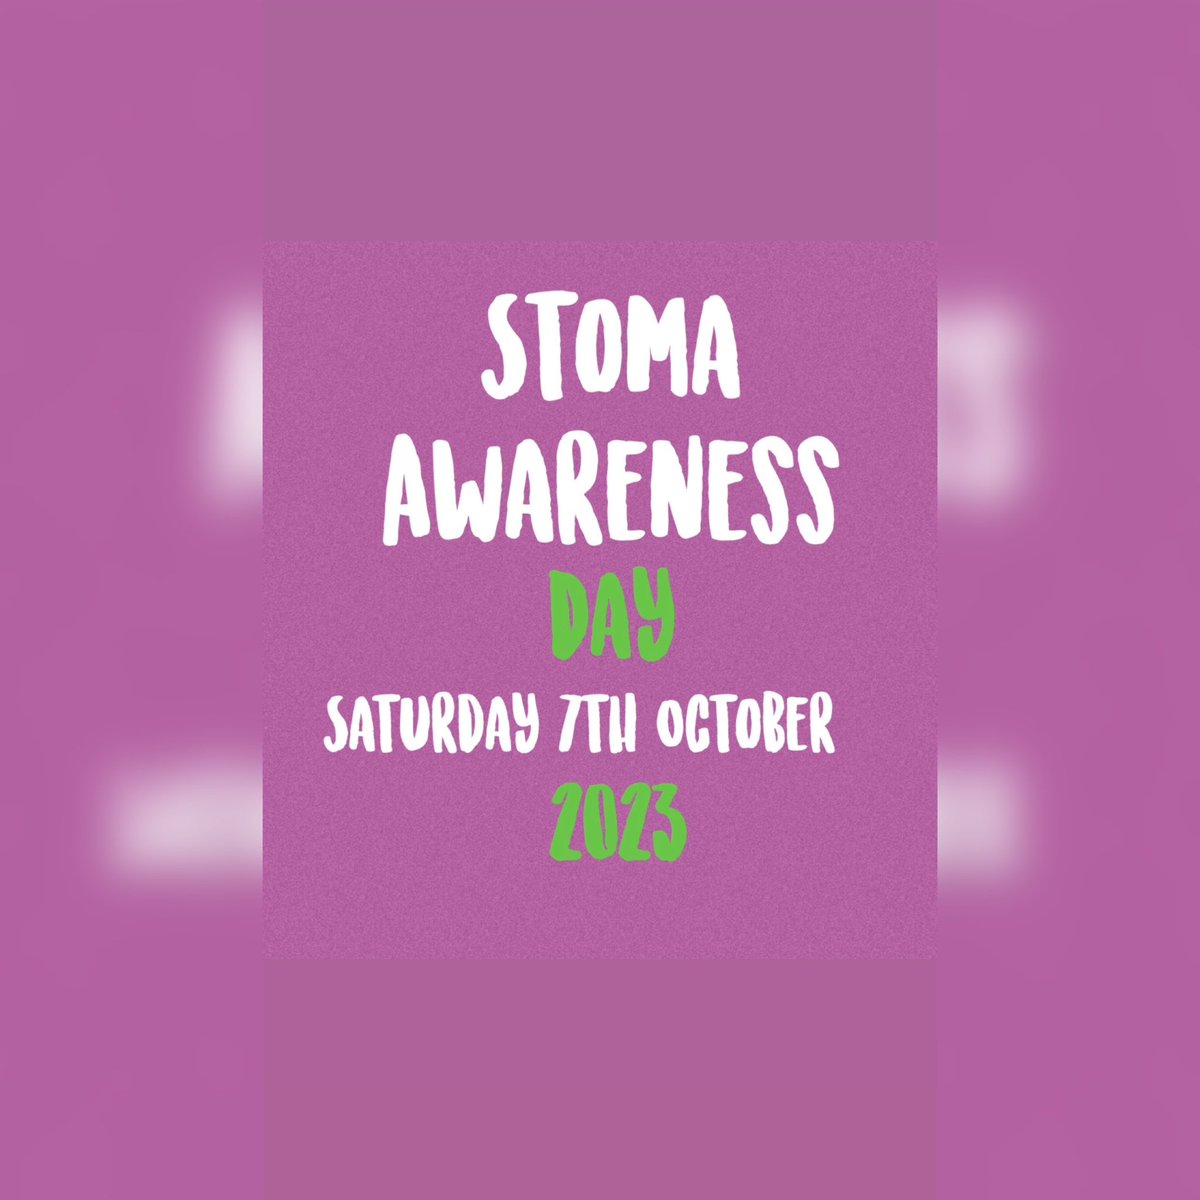 Stoma Awareness day is fast approaching let’s see if we can turn Twitter or X purple 🫶💜 #StomaAware